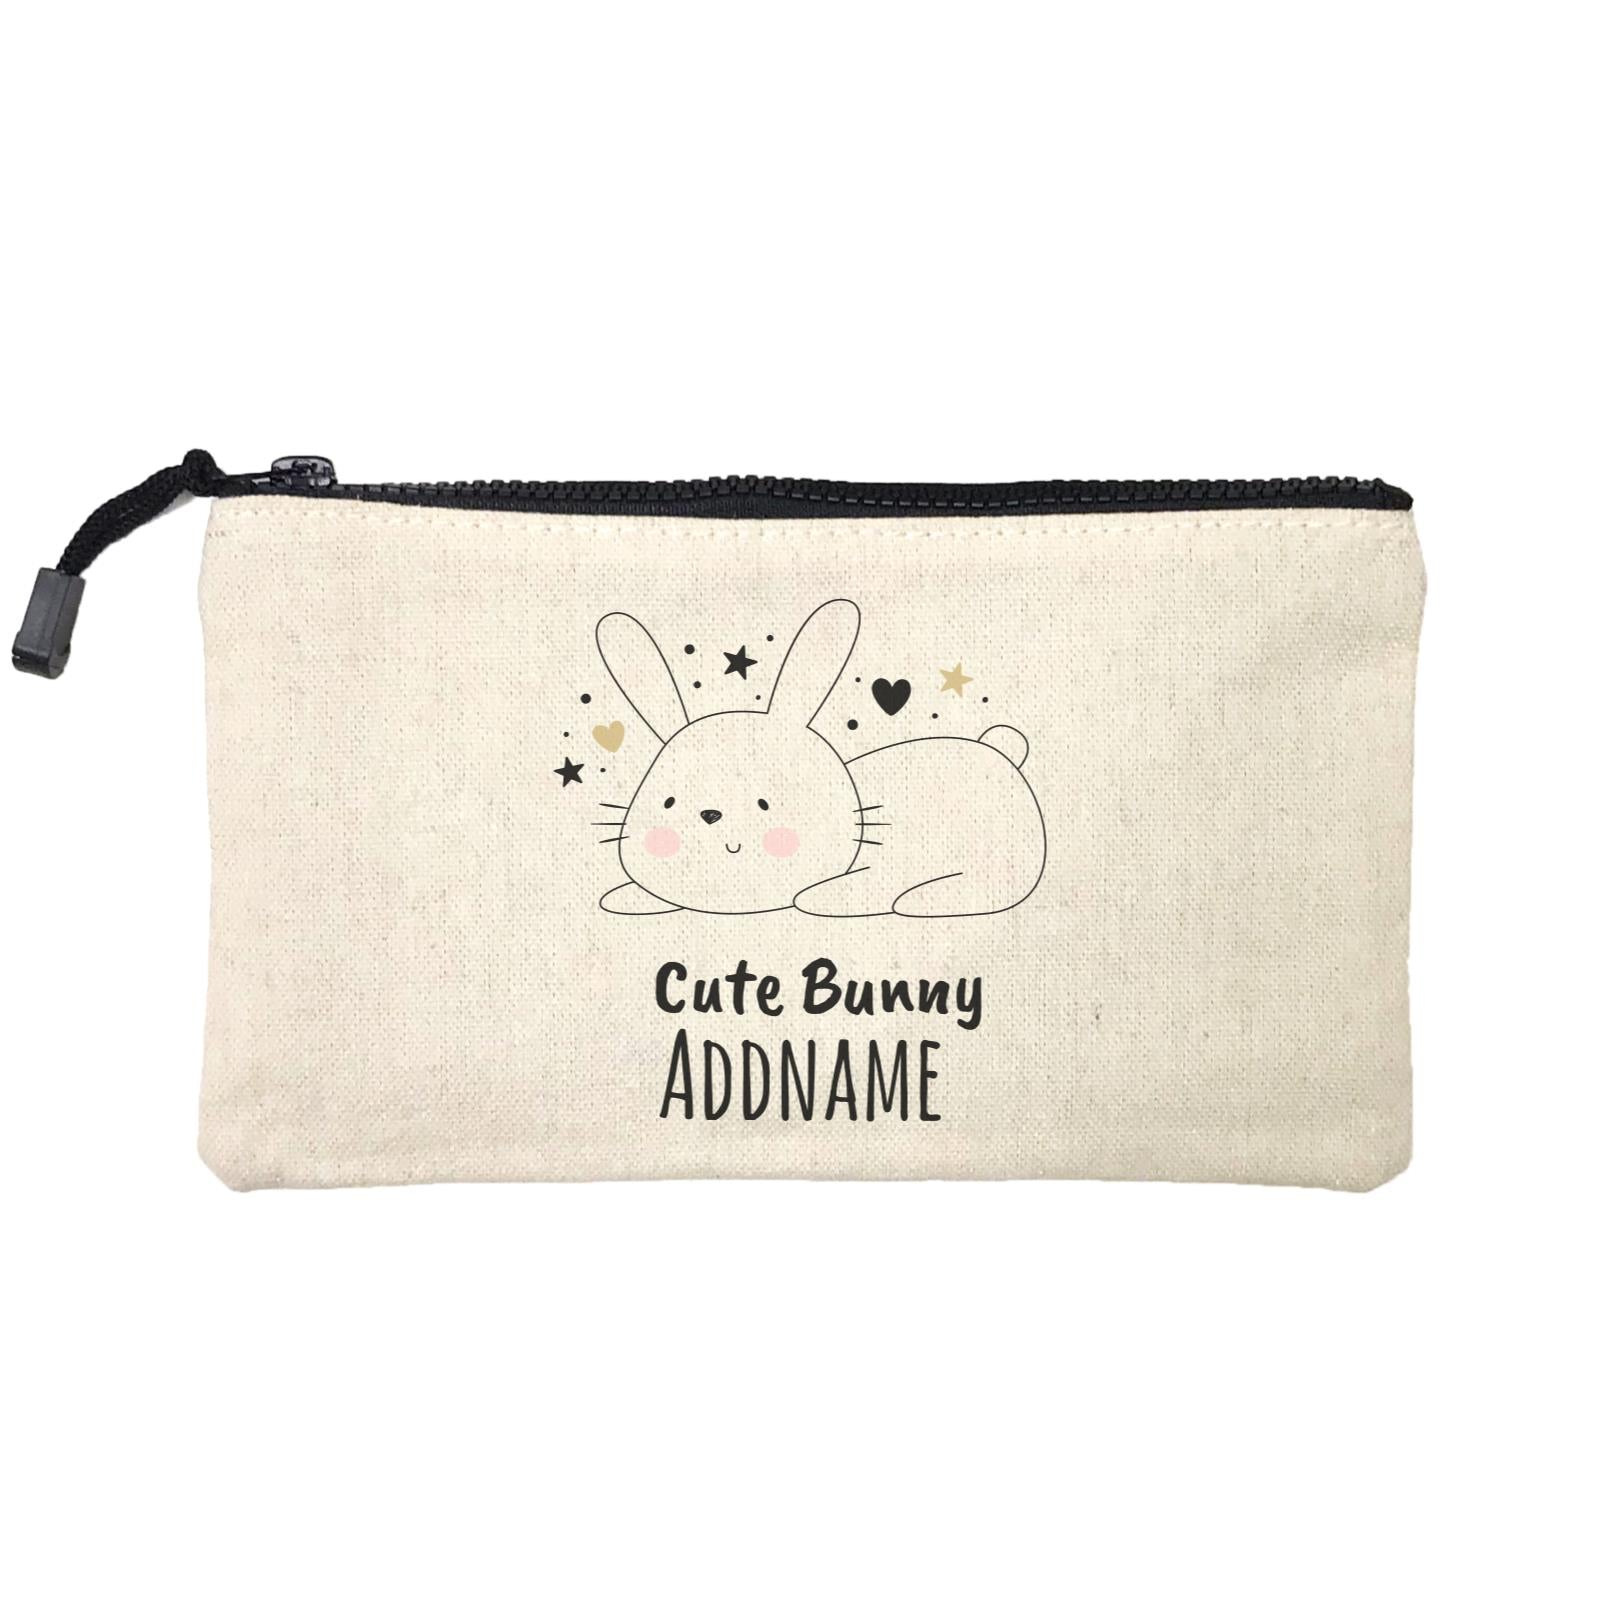 Drawn Adorable Animals Cute Bunny Addname Mini Accessories Stationery Pouch